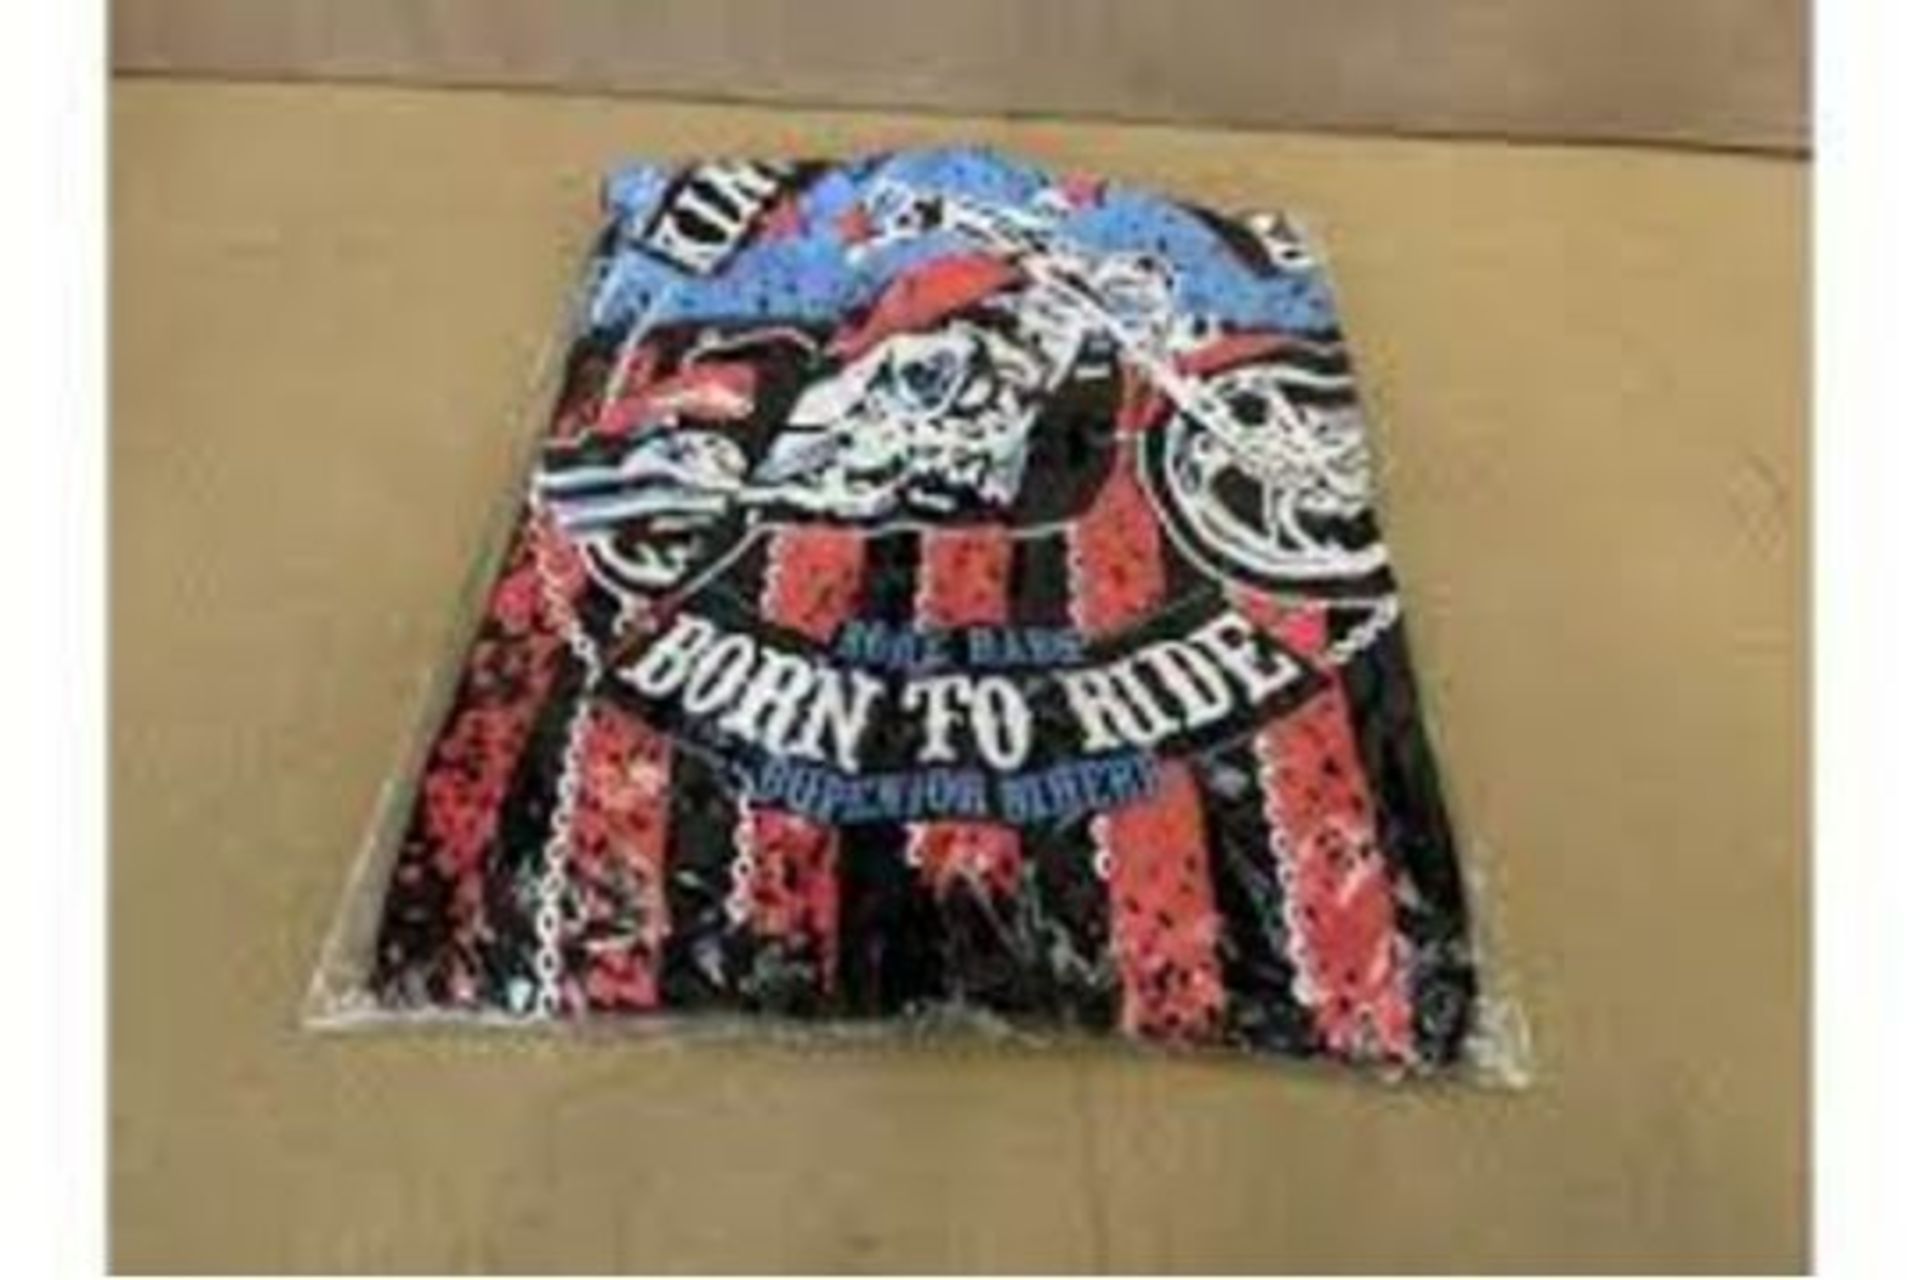 25 X BRAND NEW BORN TO RIDE ROCK DRESSES IN VARIOUS SIZES S1P